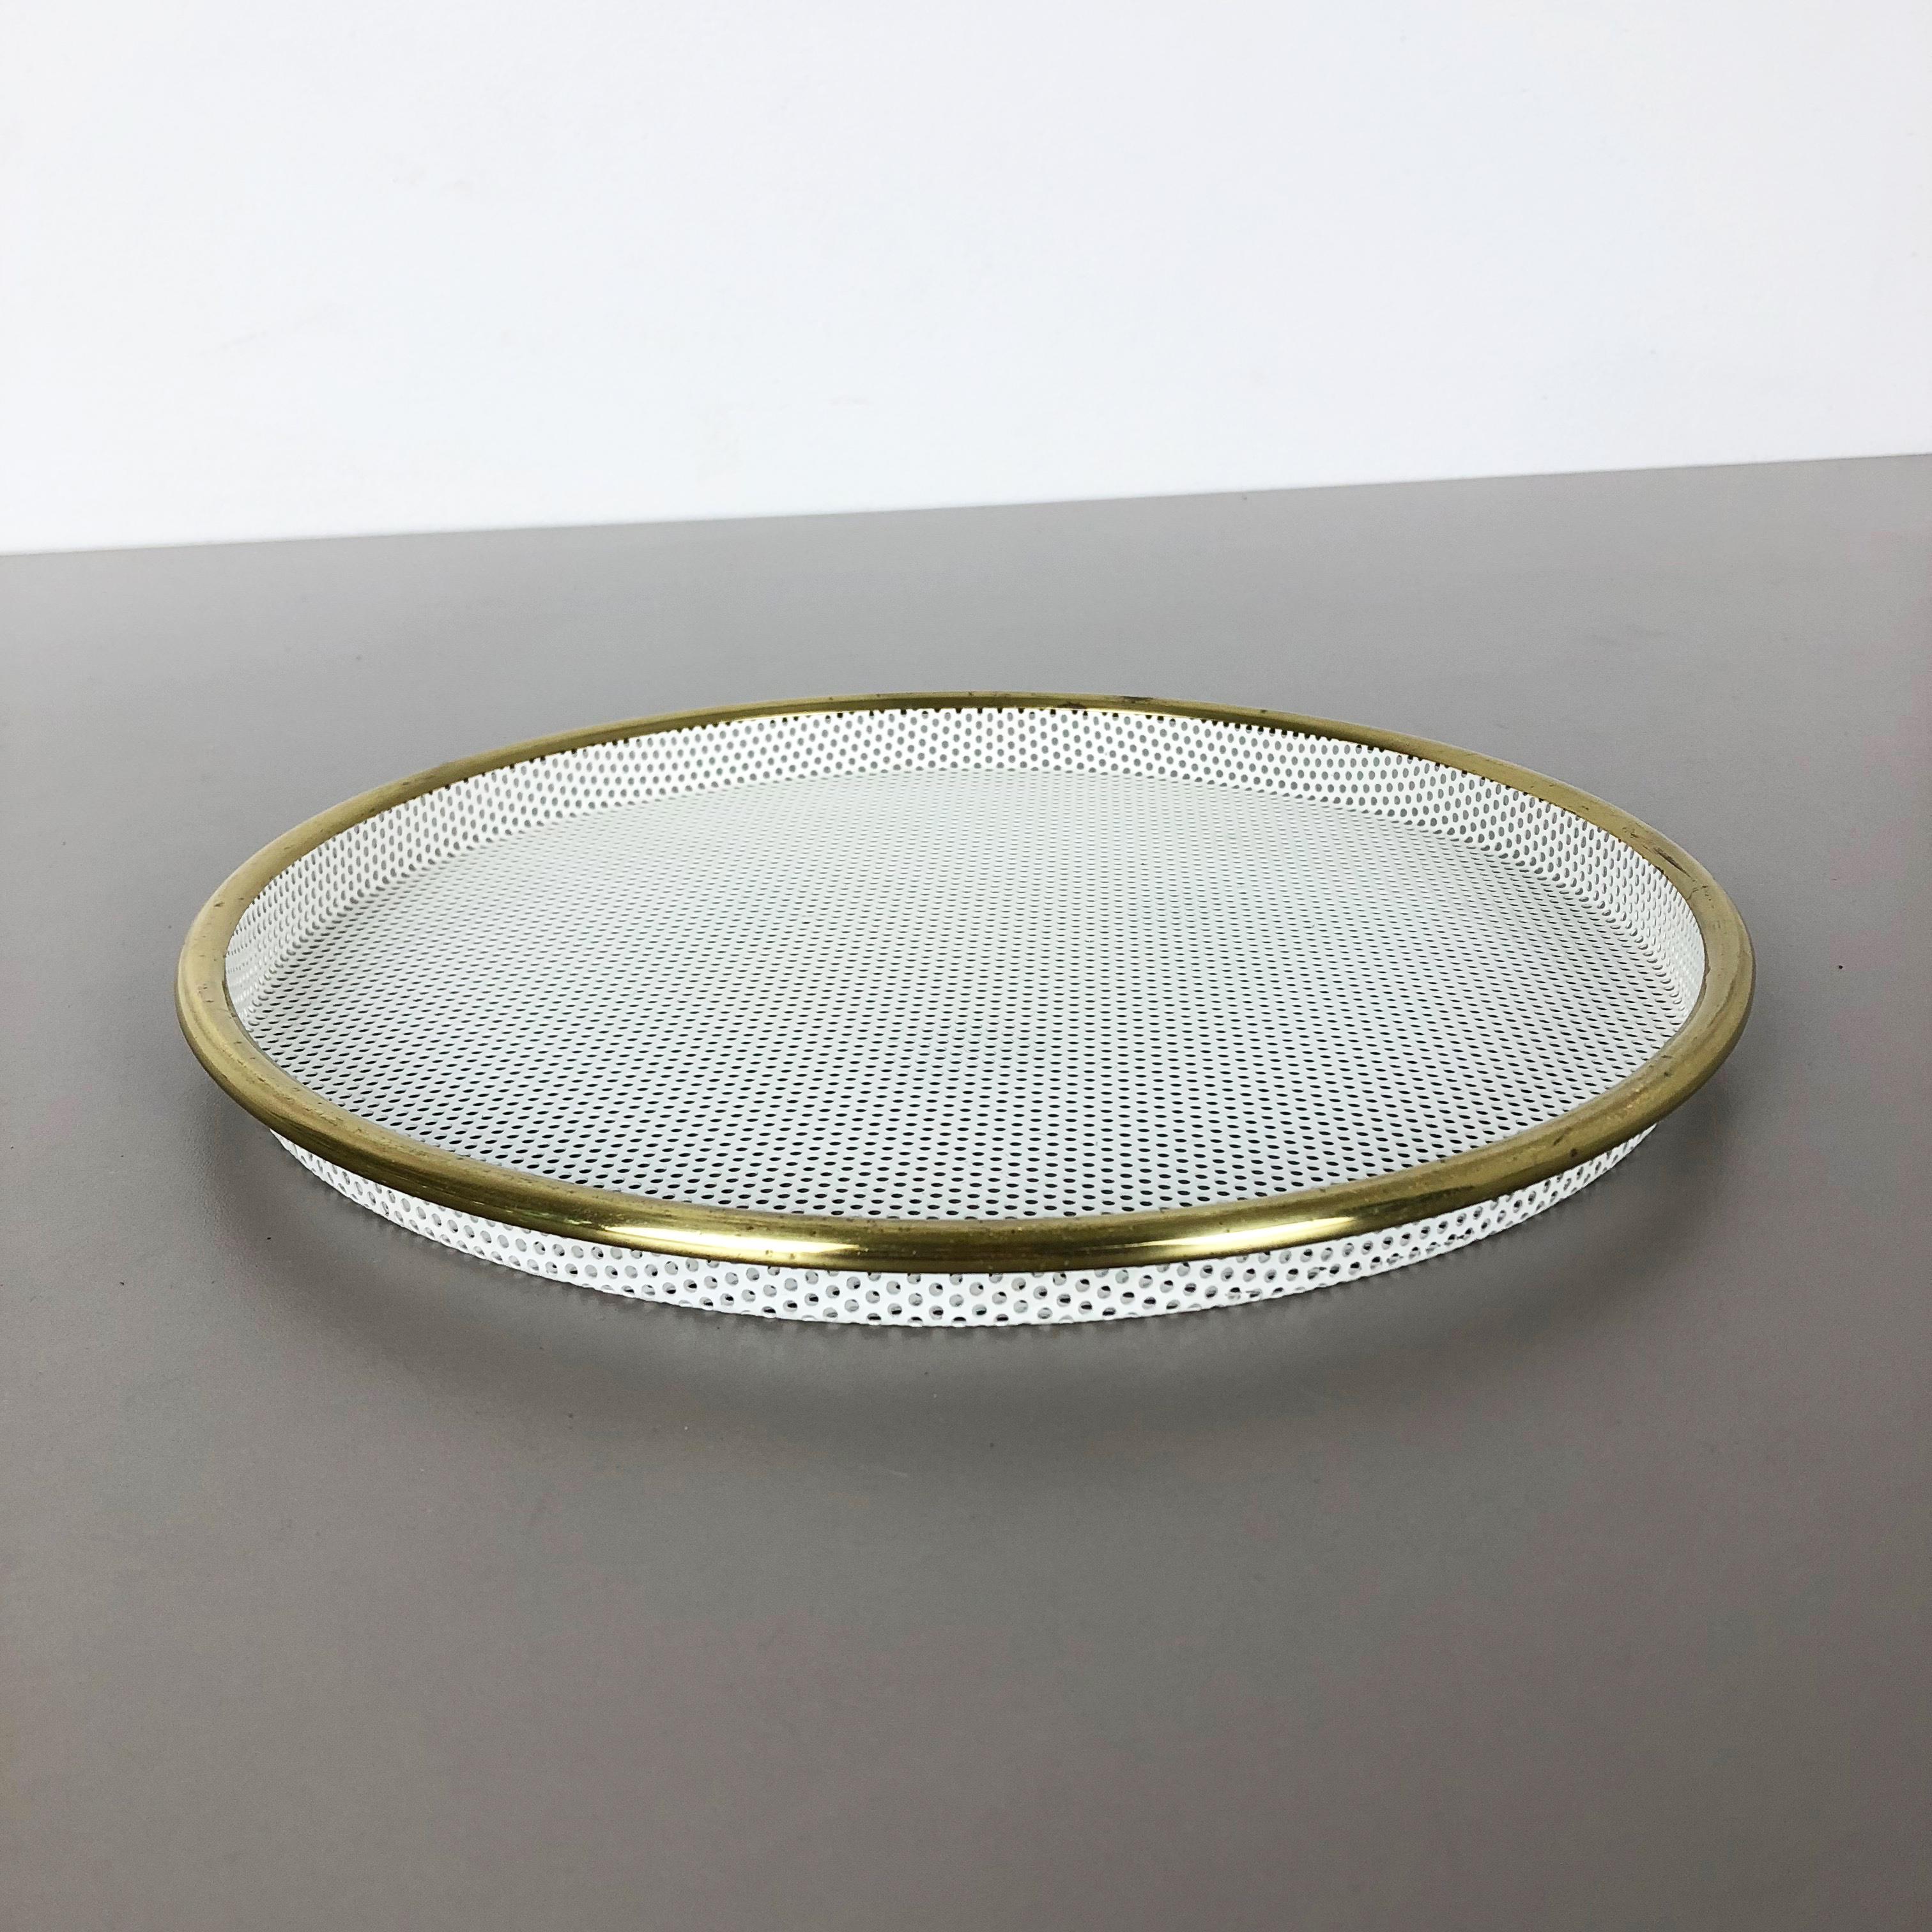 Metal tray.

In style of Mathieu Mategot.

Origin: France, 

1960s.

This original vintage tray element was produced in the 1960s in France. It was made of metal in whole pattern optic which is reminiscent with the designs by Mathieu